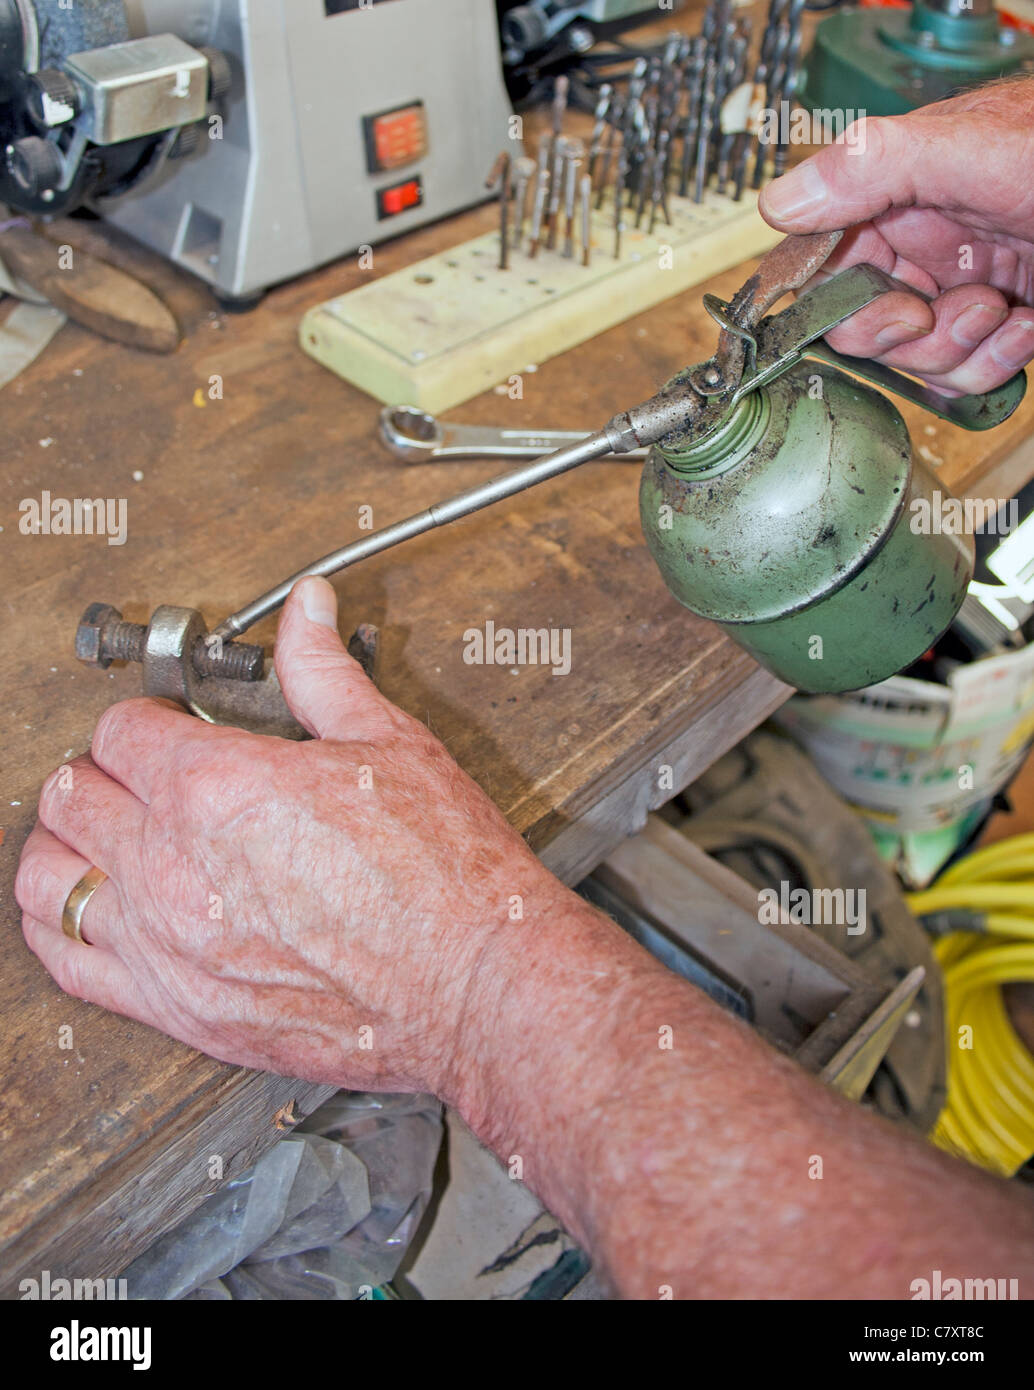 Engineer using a oil can to apply oil to a thread Stock Photo